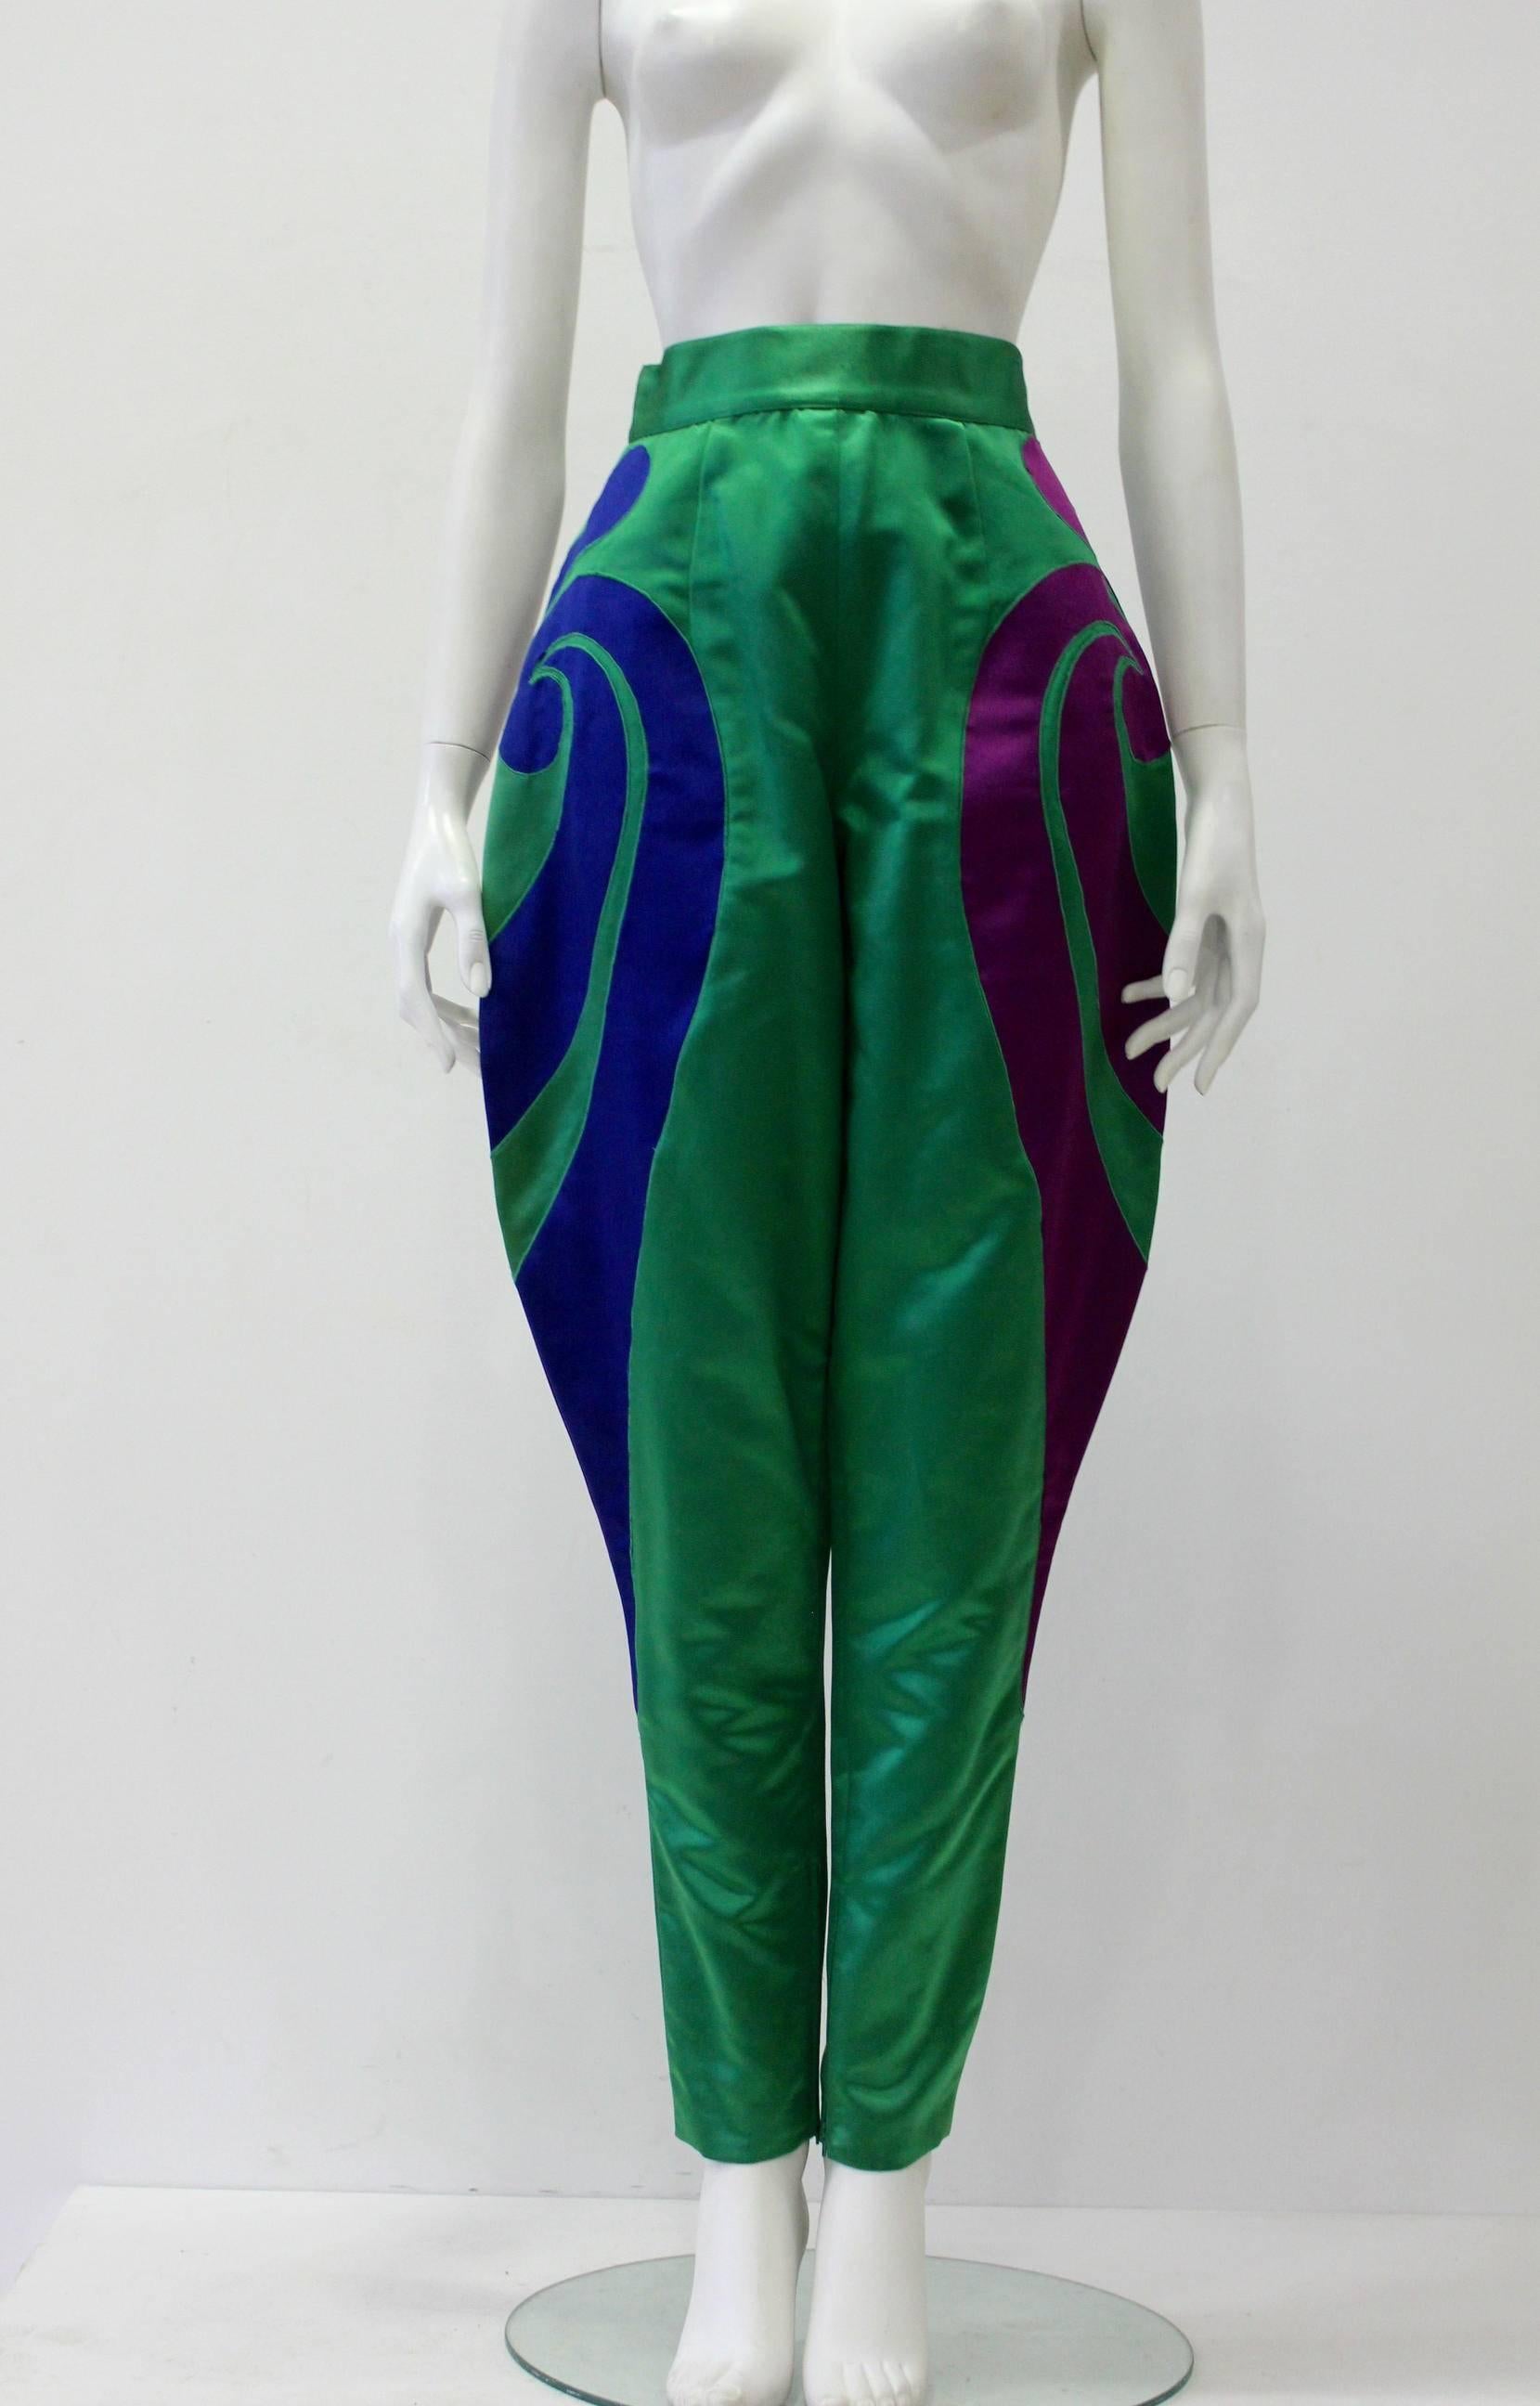 One Of A Kind Gianni Versace Silk Applique Jodhpurs Spring 1990. As Shown In The Show Of Spring-Summer 1990 Worn With Chain Metal Blouse. It Is A Fascinating Outfit Even For Red Carpet Presentation.